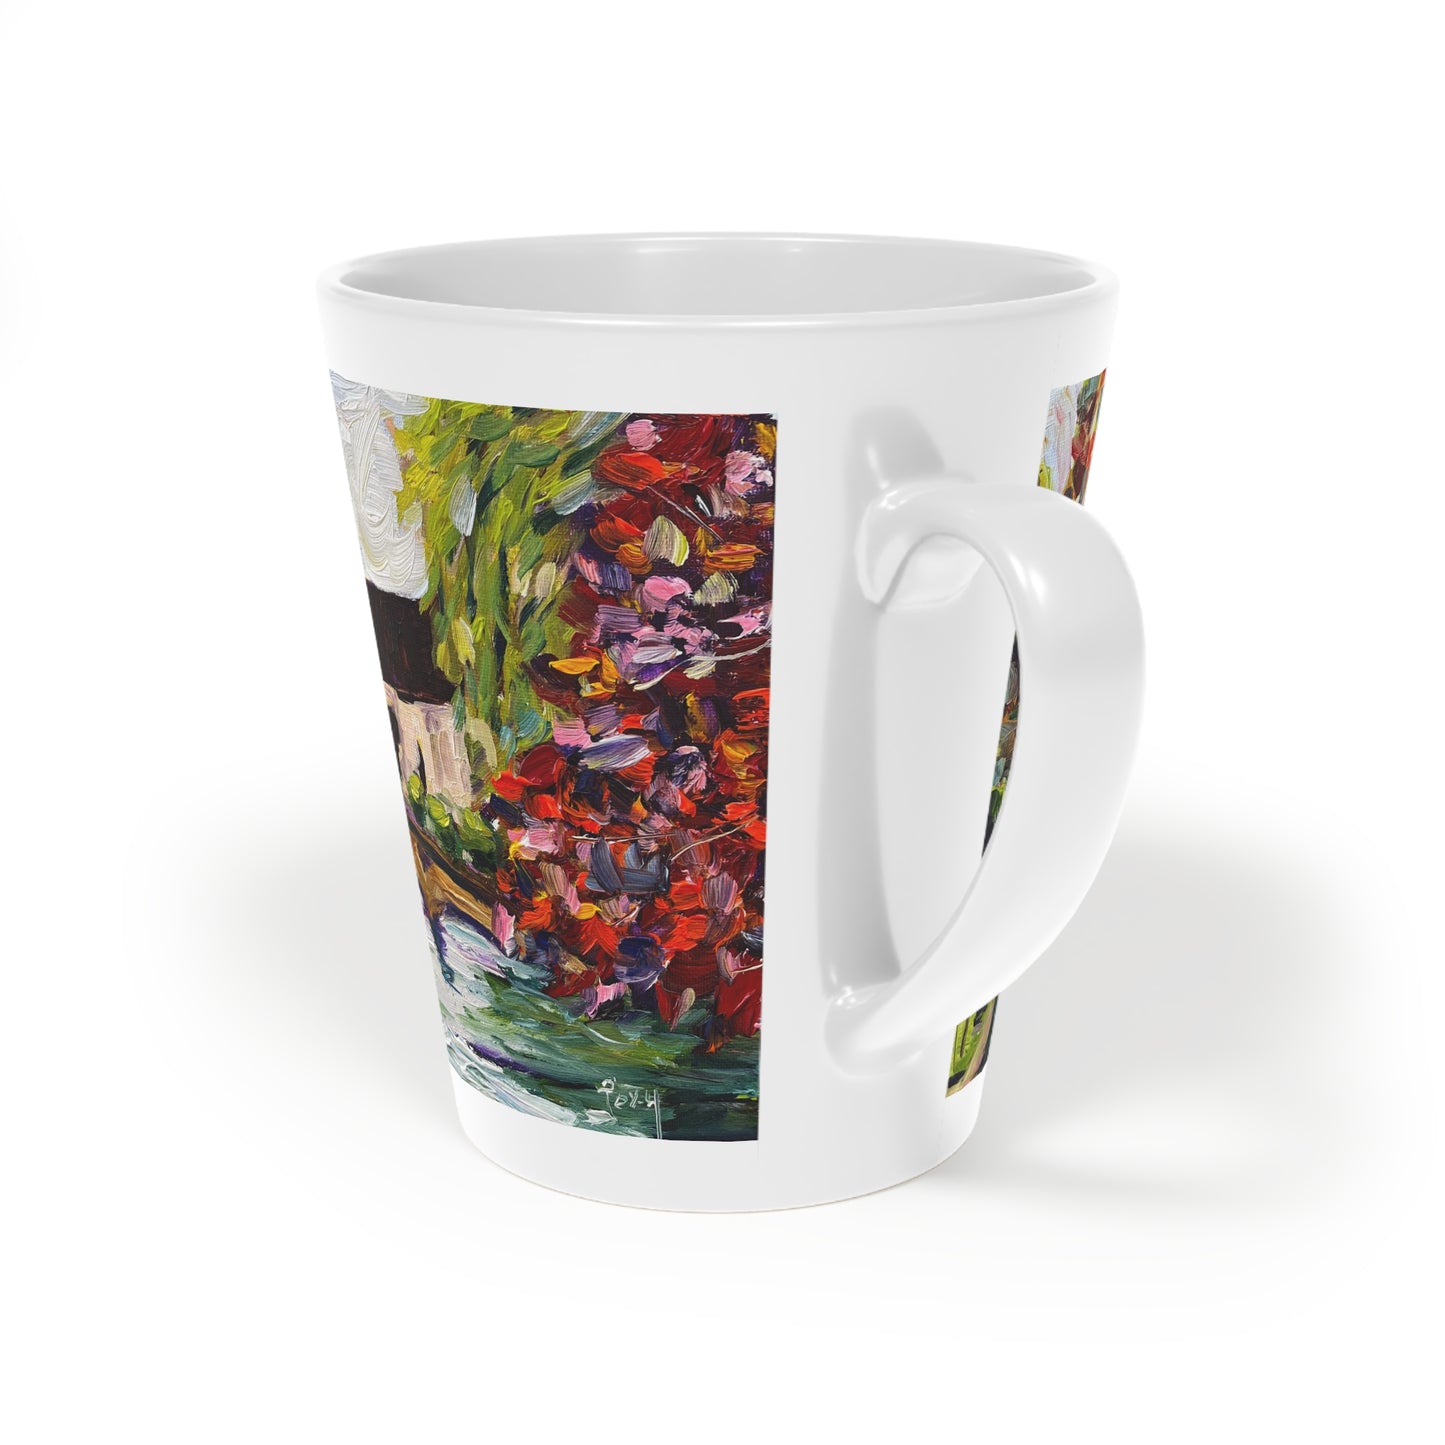 Autumn in Bourton on the Water "Cotswolds"- Latte Mug, 12oz